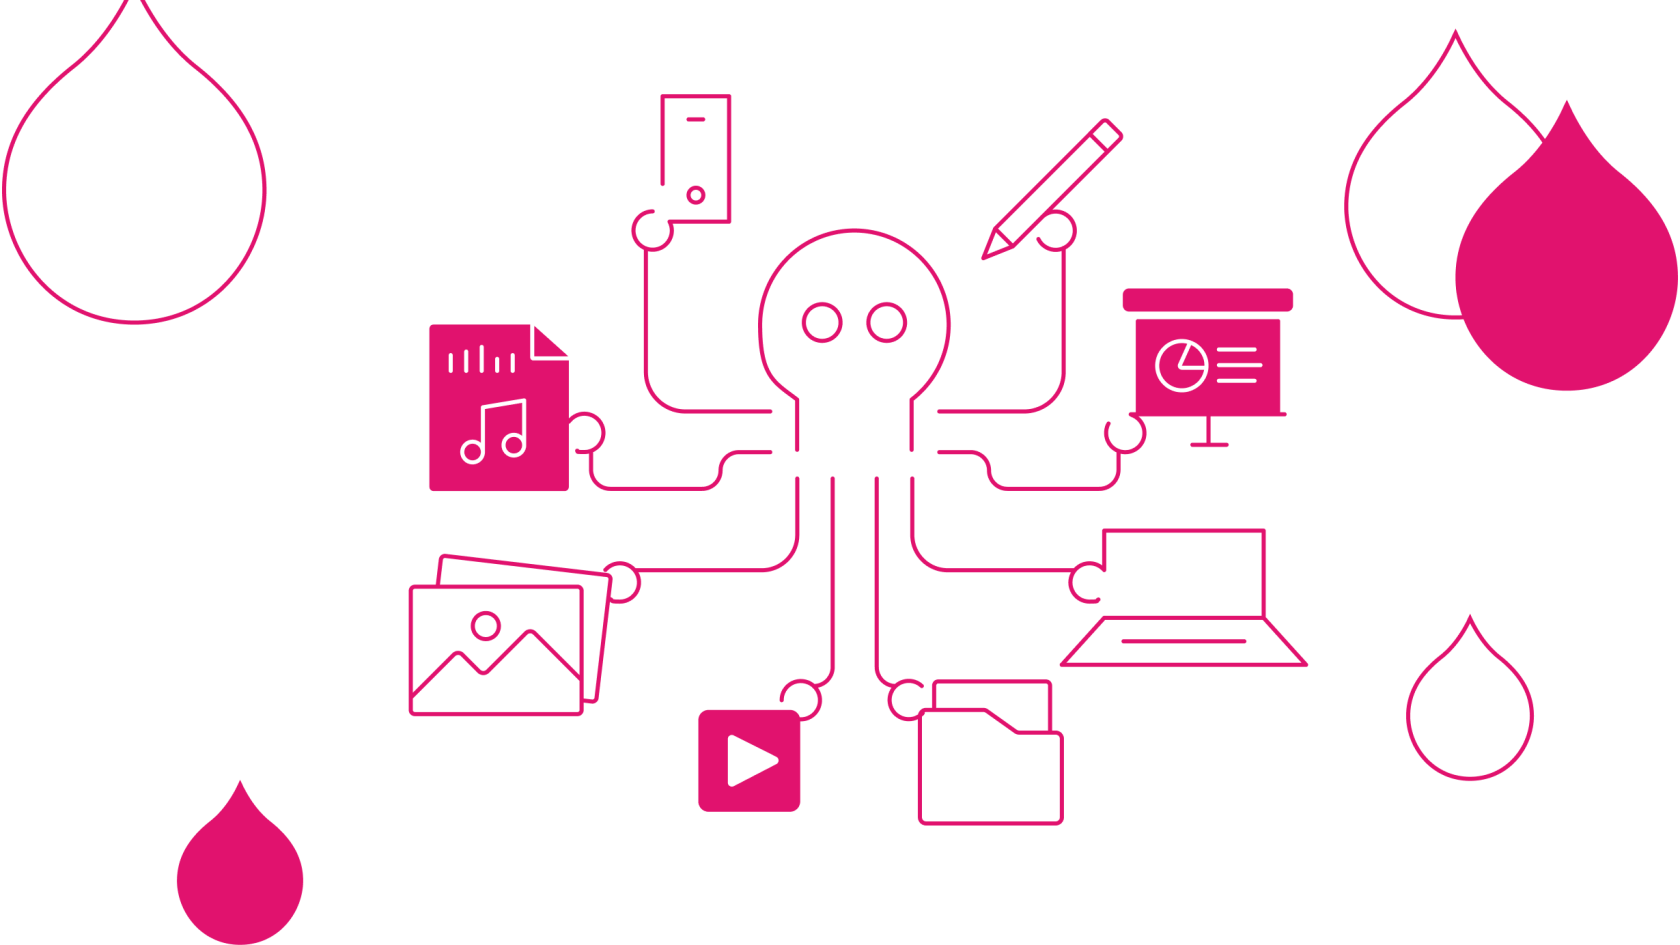 pink acquia droplets with a line art illustration of an octopus holding various media types